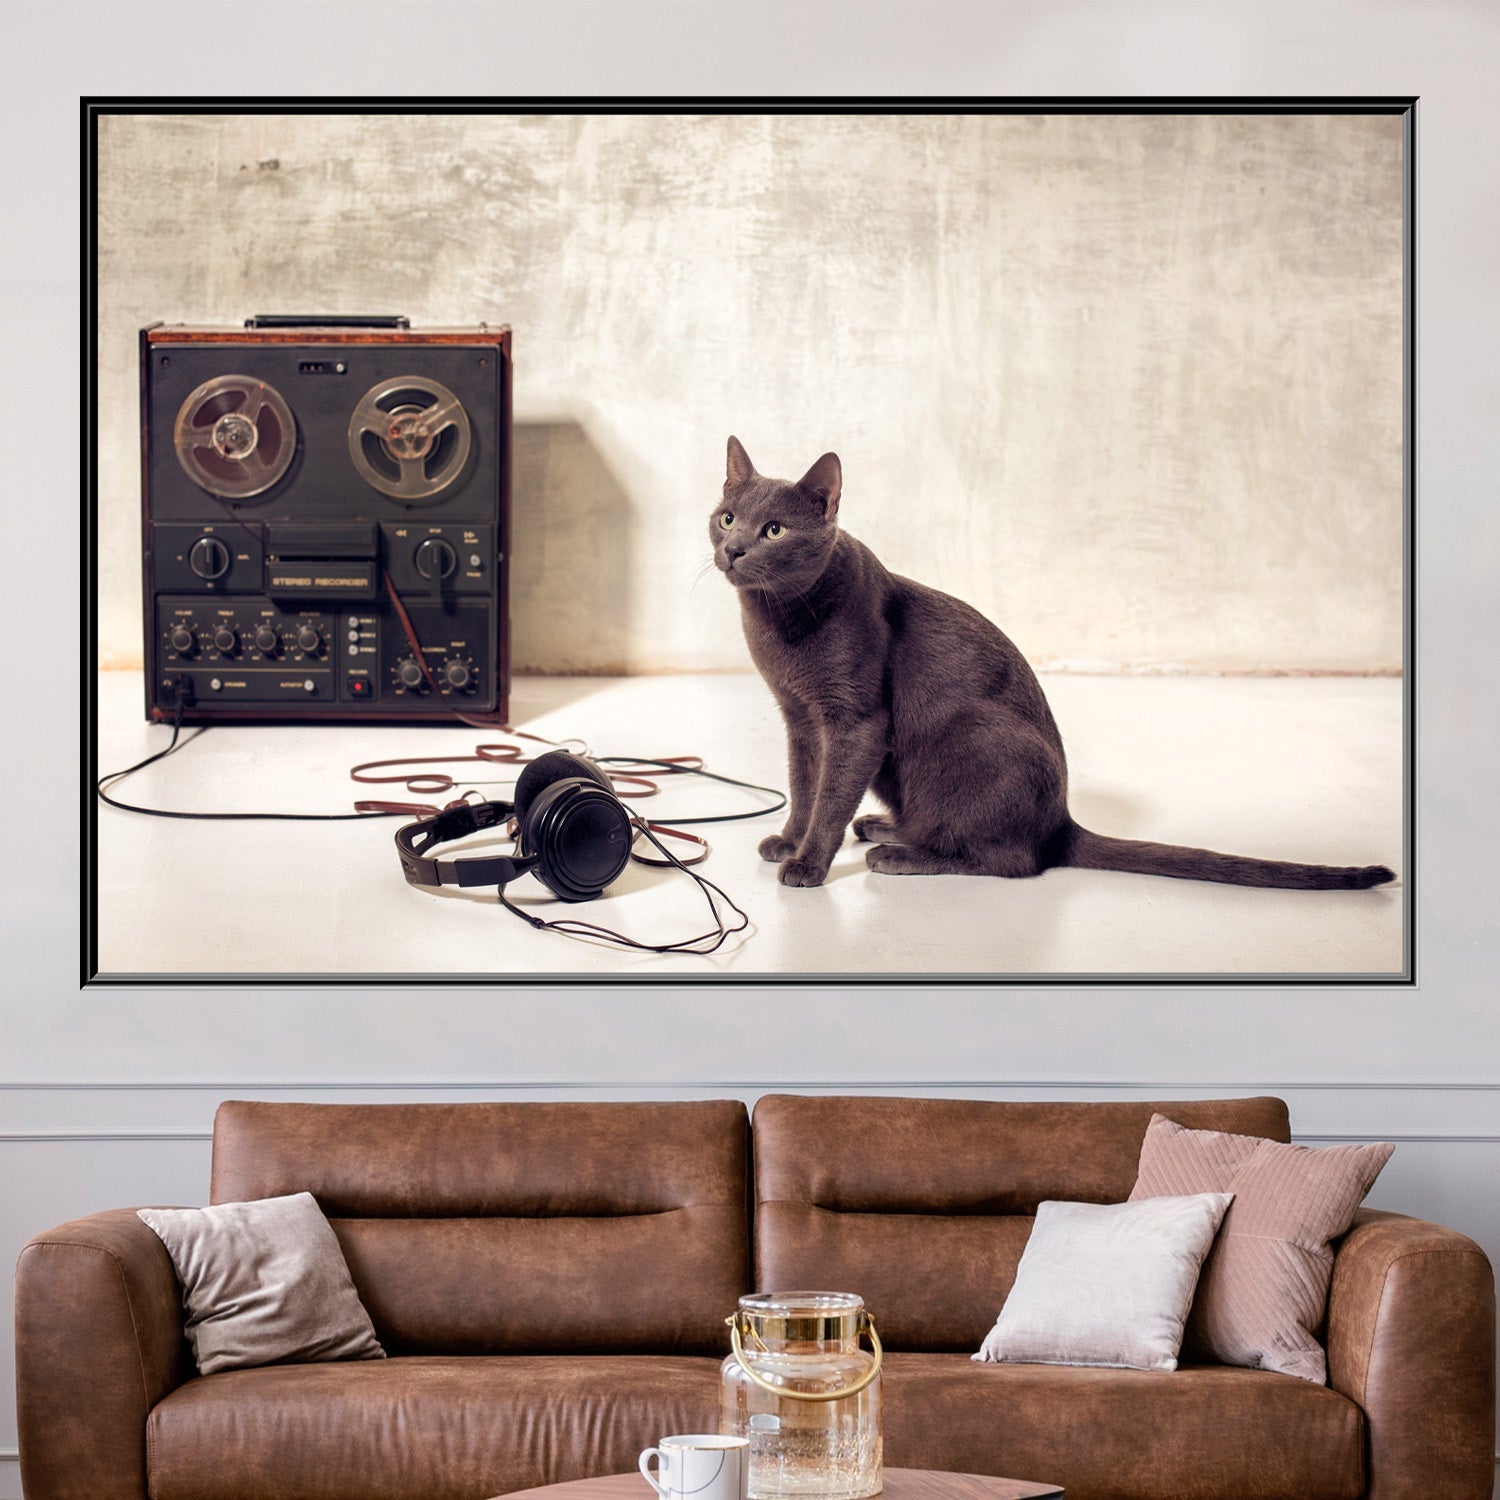 https://cdn.shopify.com/s/files/1/0387/9986/8044/products/HipsterCatandMagnetophonCanvasArtprintStretched-4.jpg